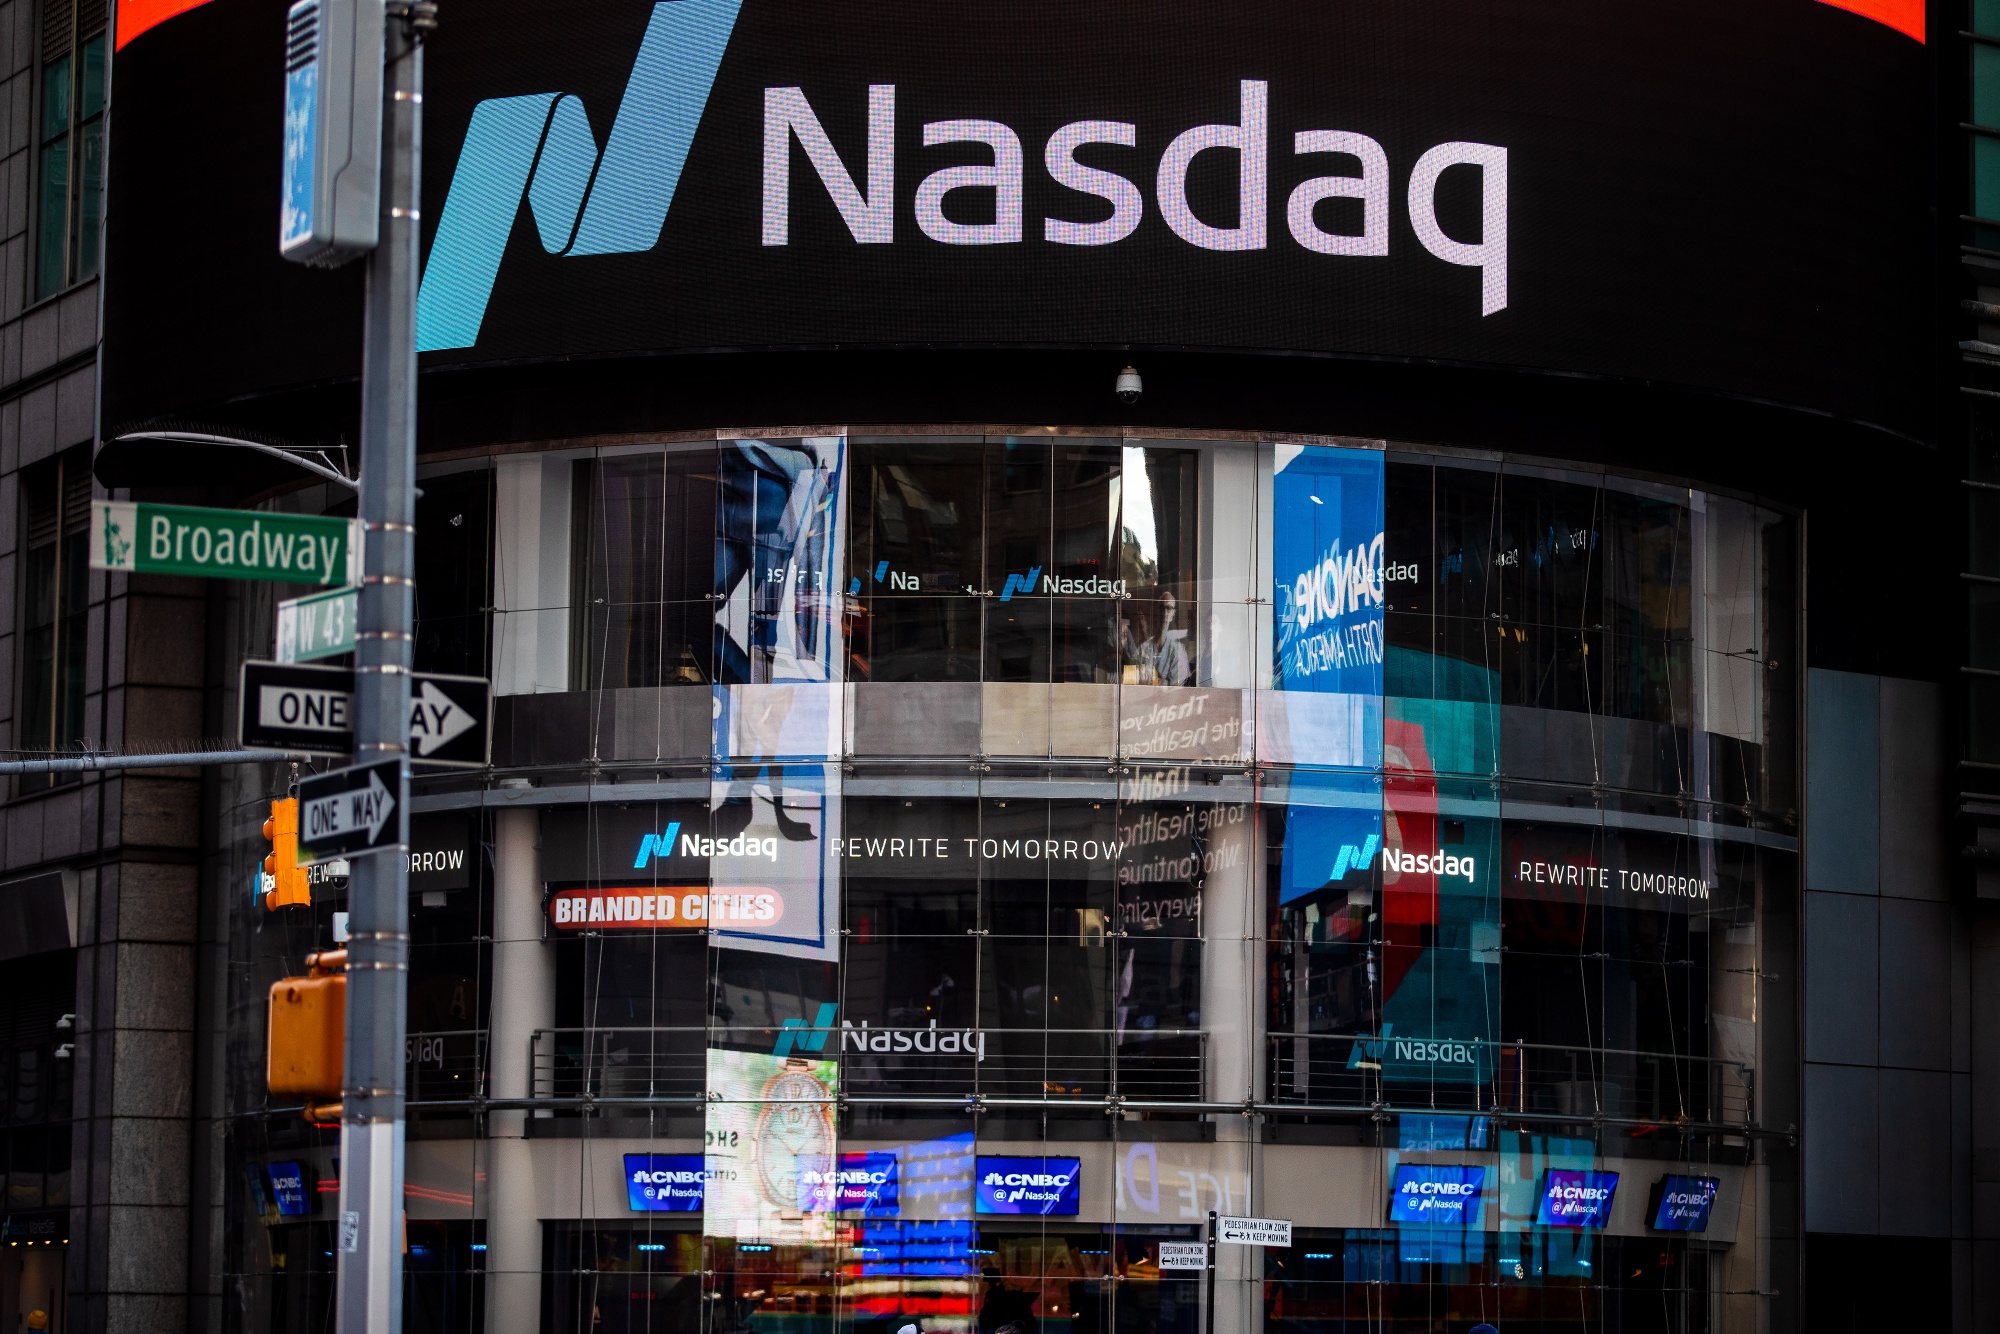 The Nasdaq Market Site in the Times Square area of New York, U.S.